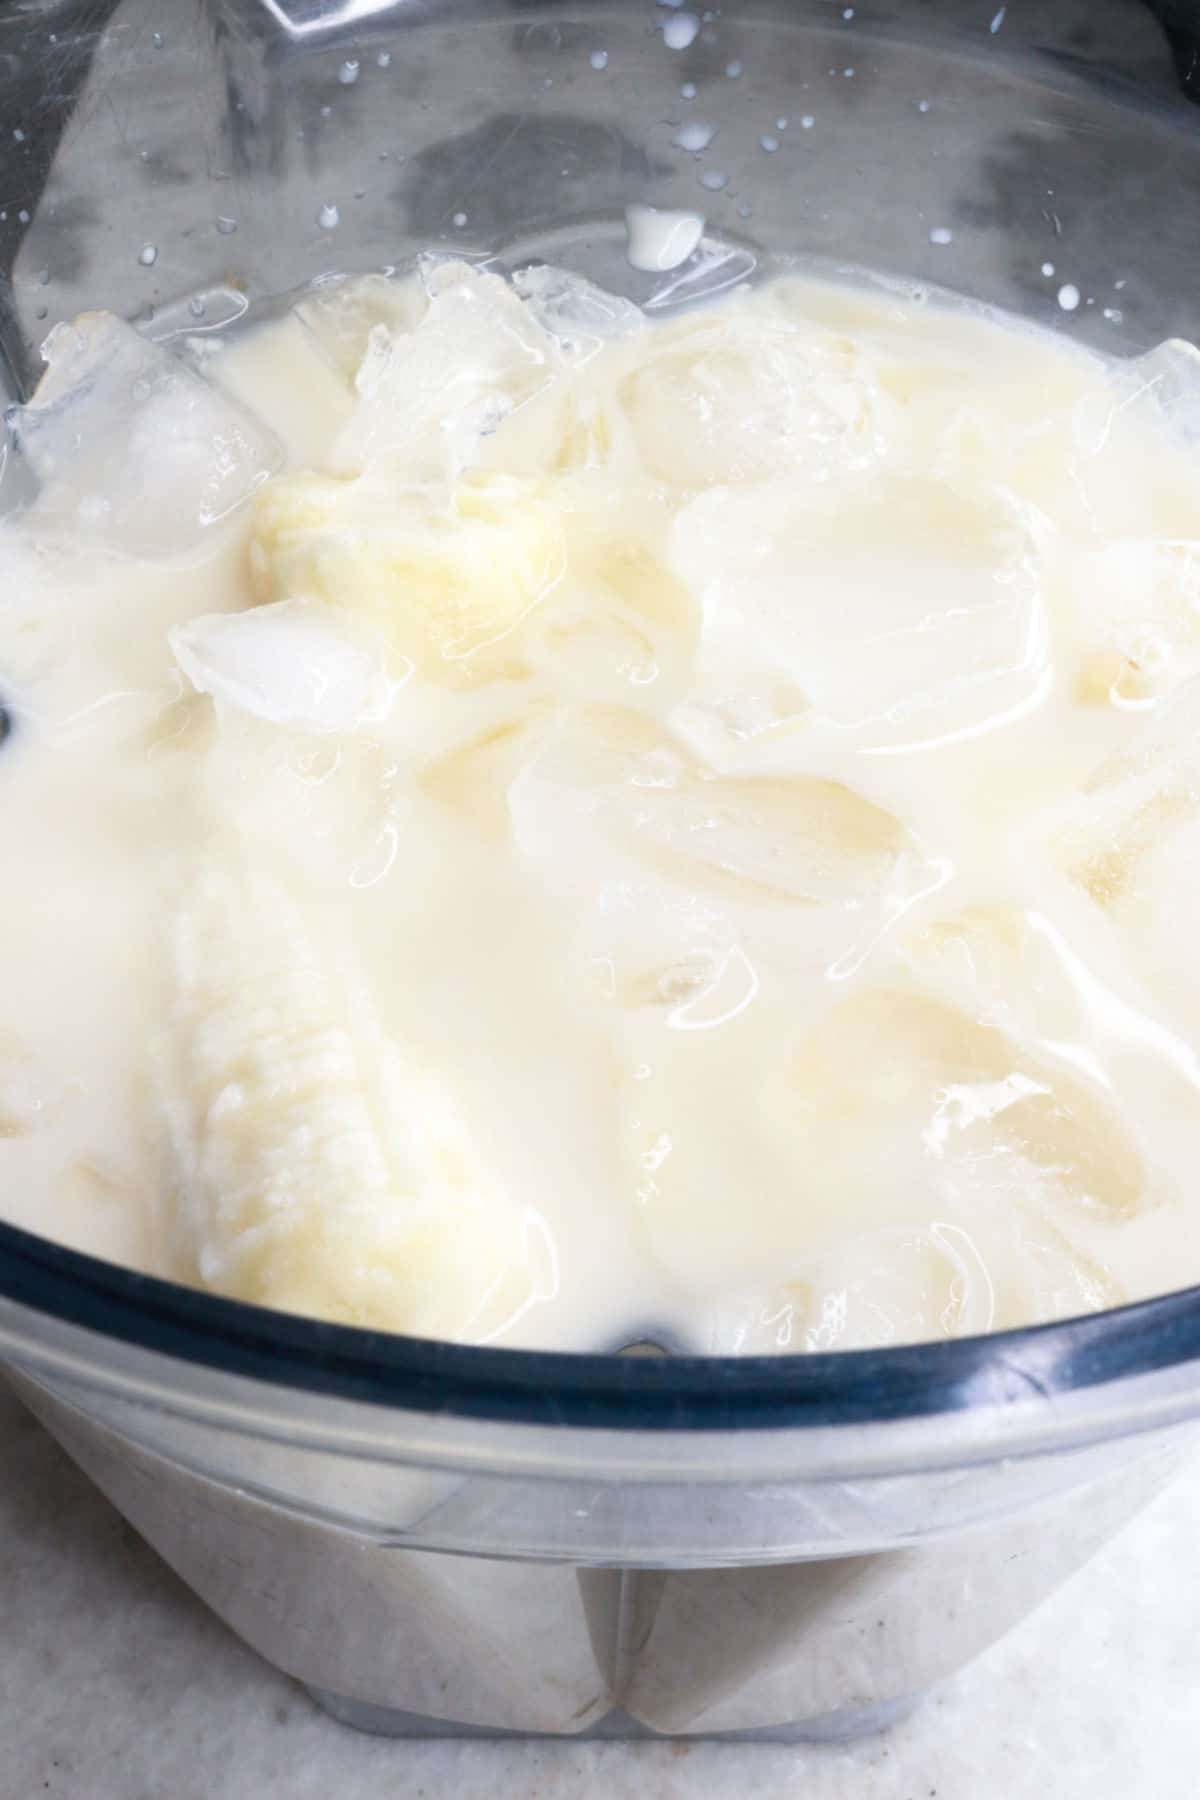 blender with bananas, ice, milk and water